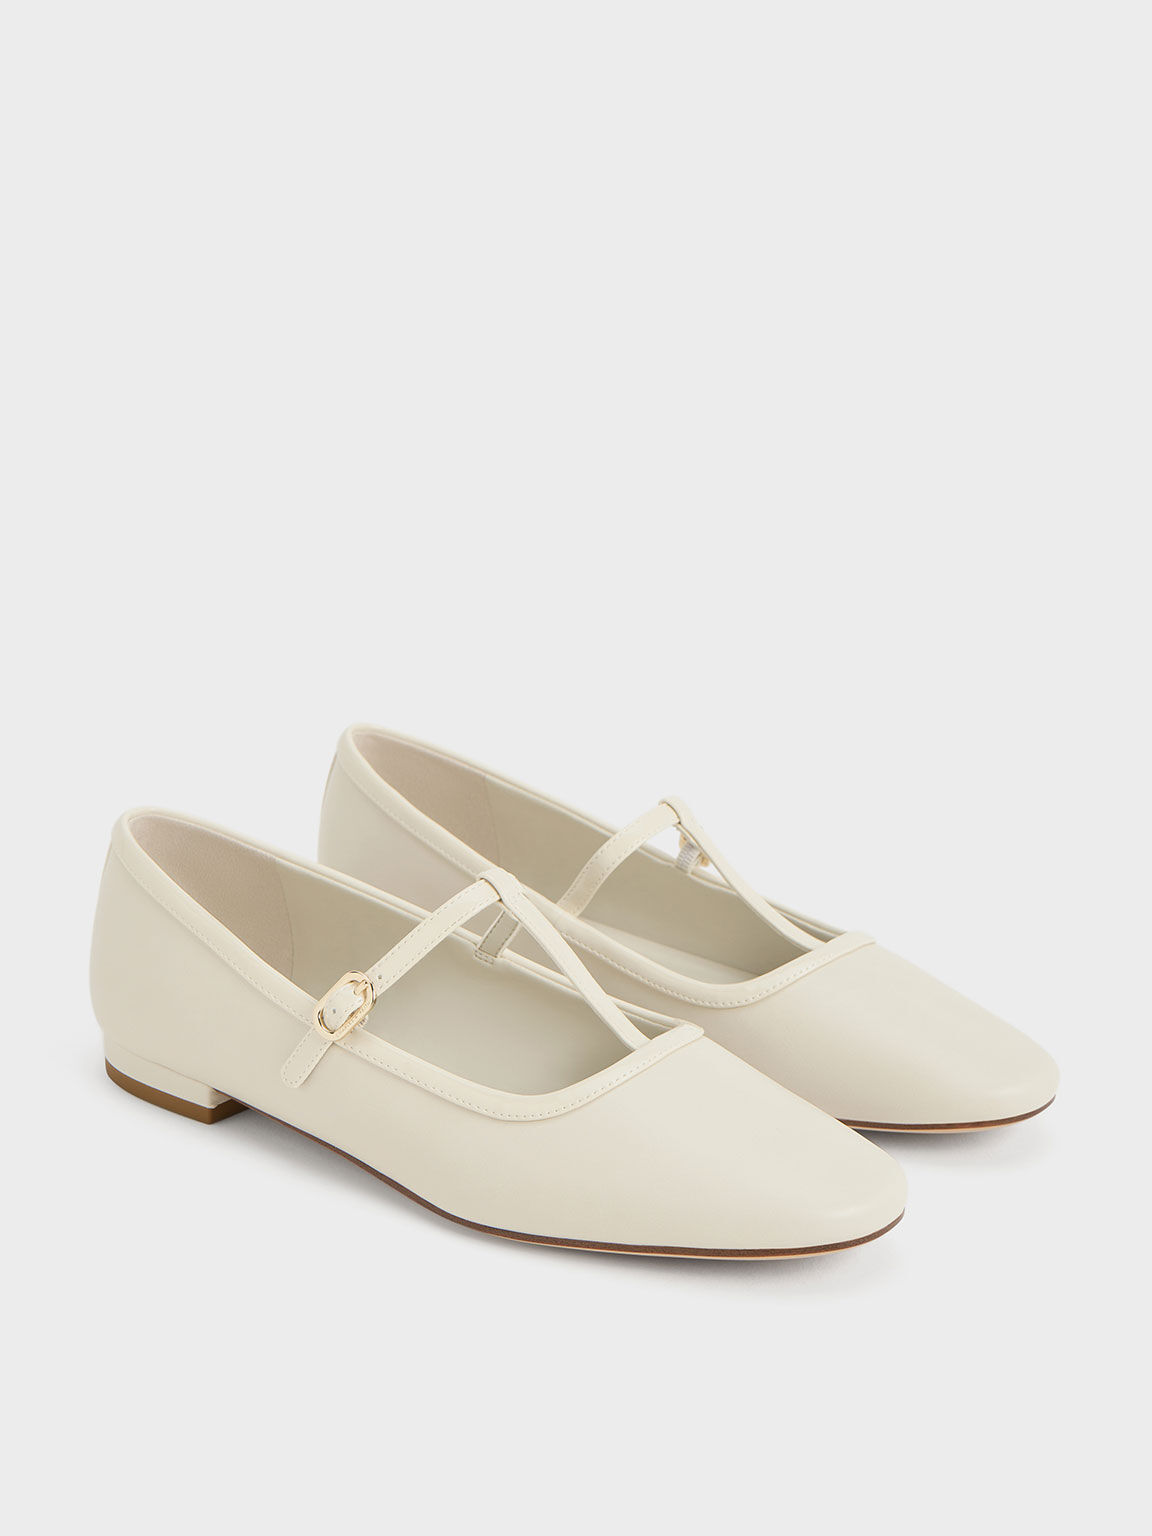 Women's Flats | Shop Exclusives Styles | CHARLES & KEITH US